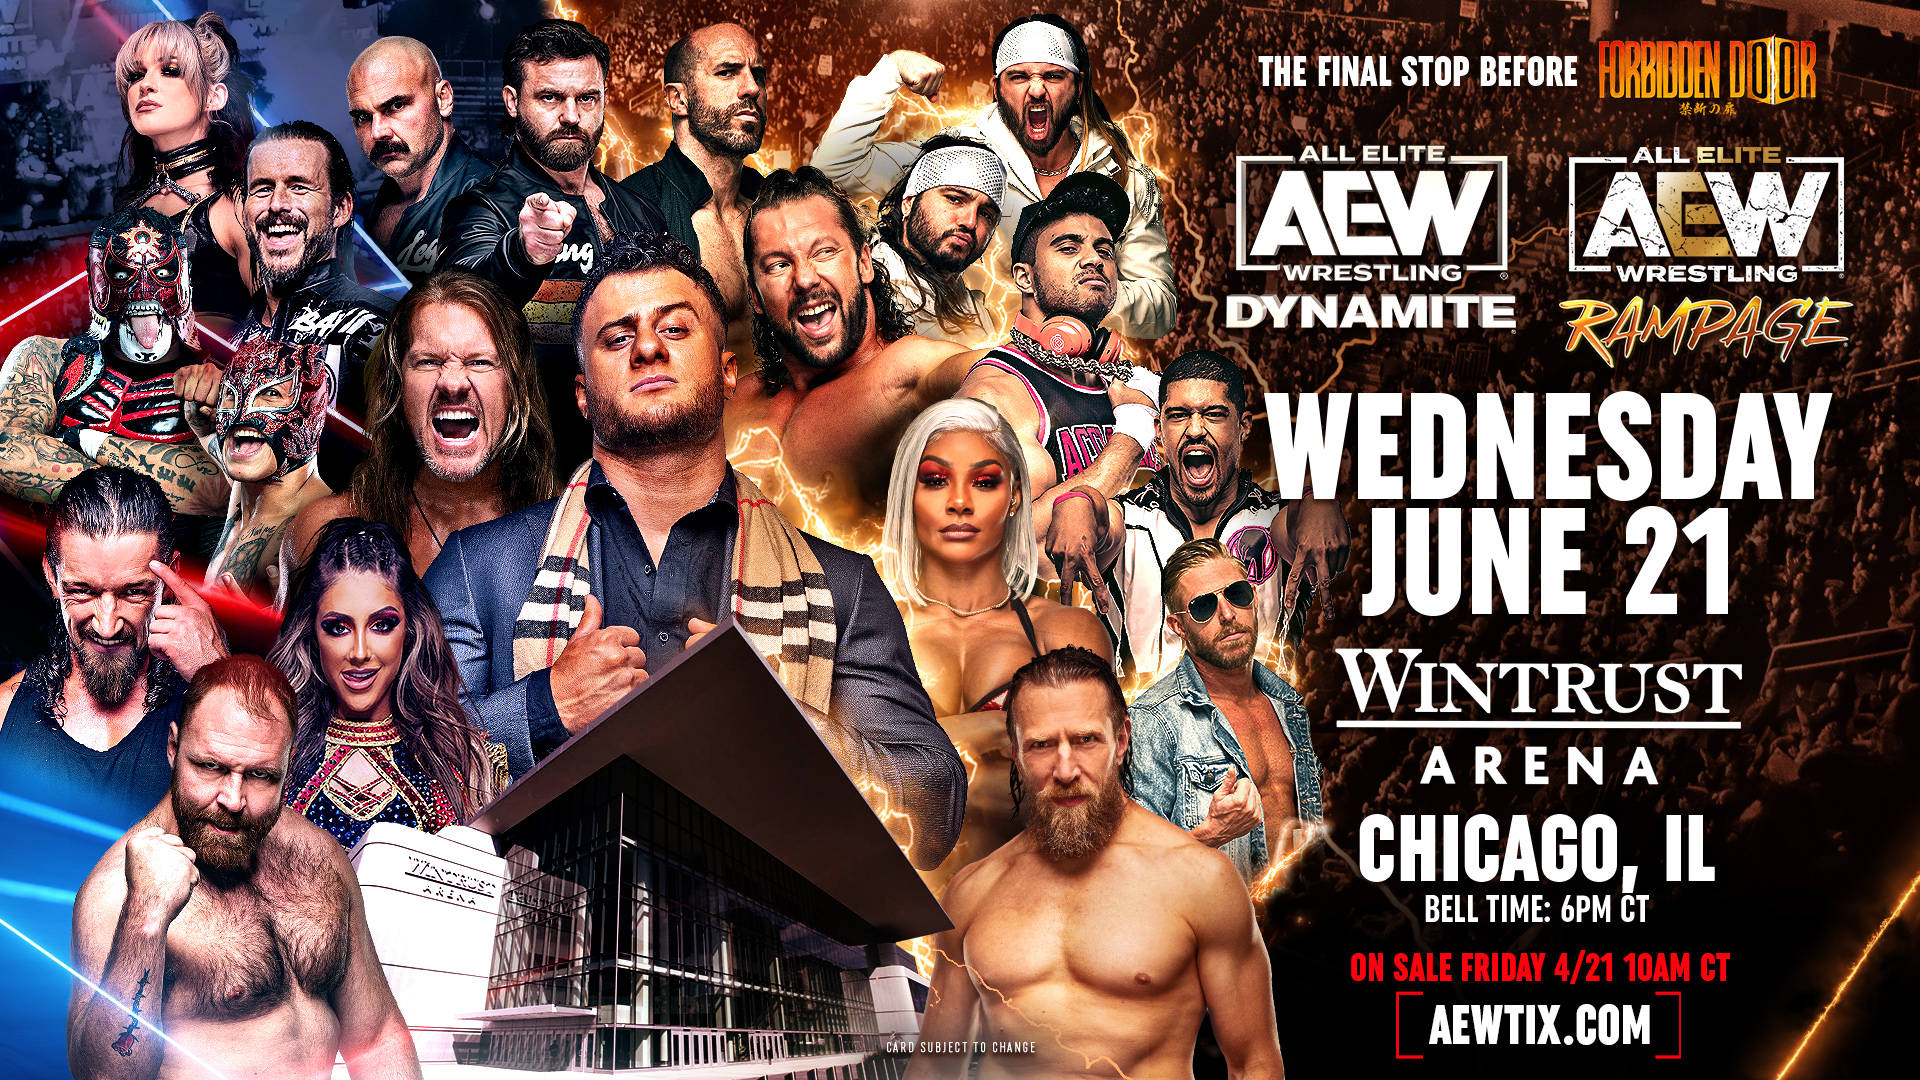 AEW returning to Chicago for final shows ahead of Forbidden Door WWE